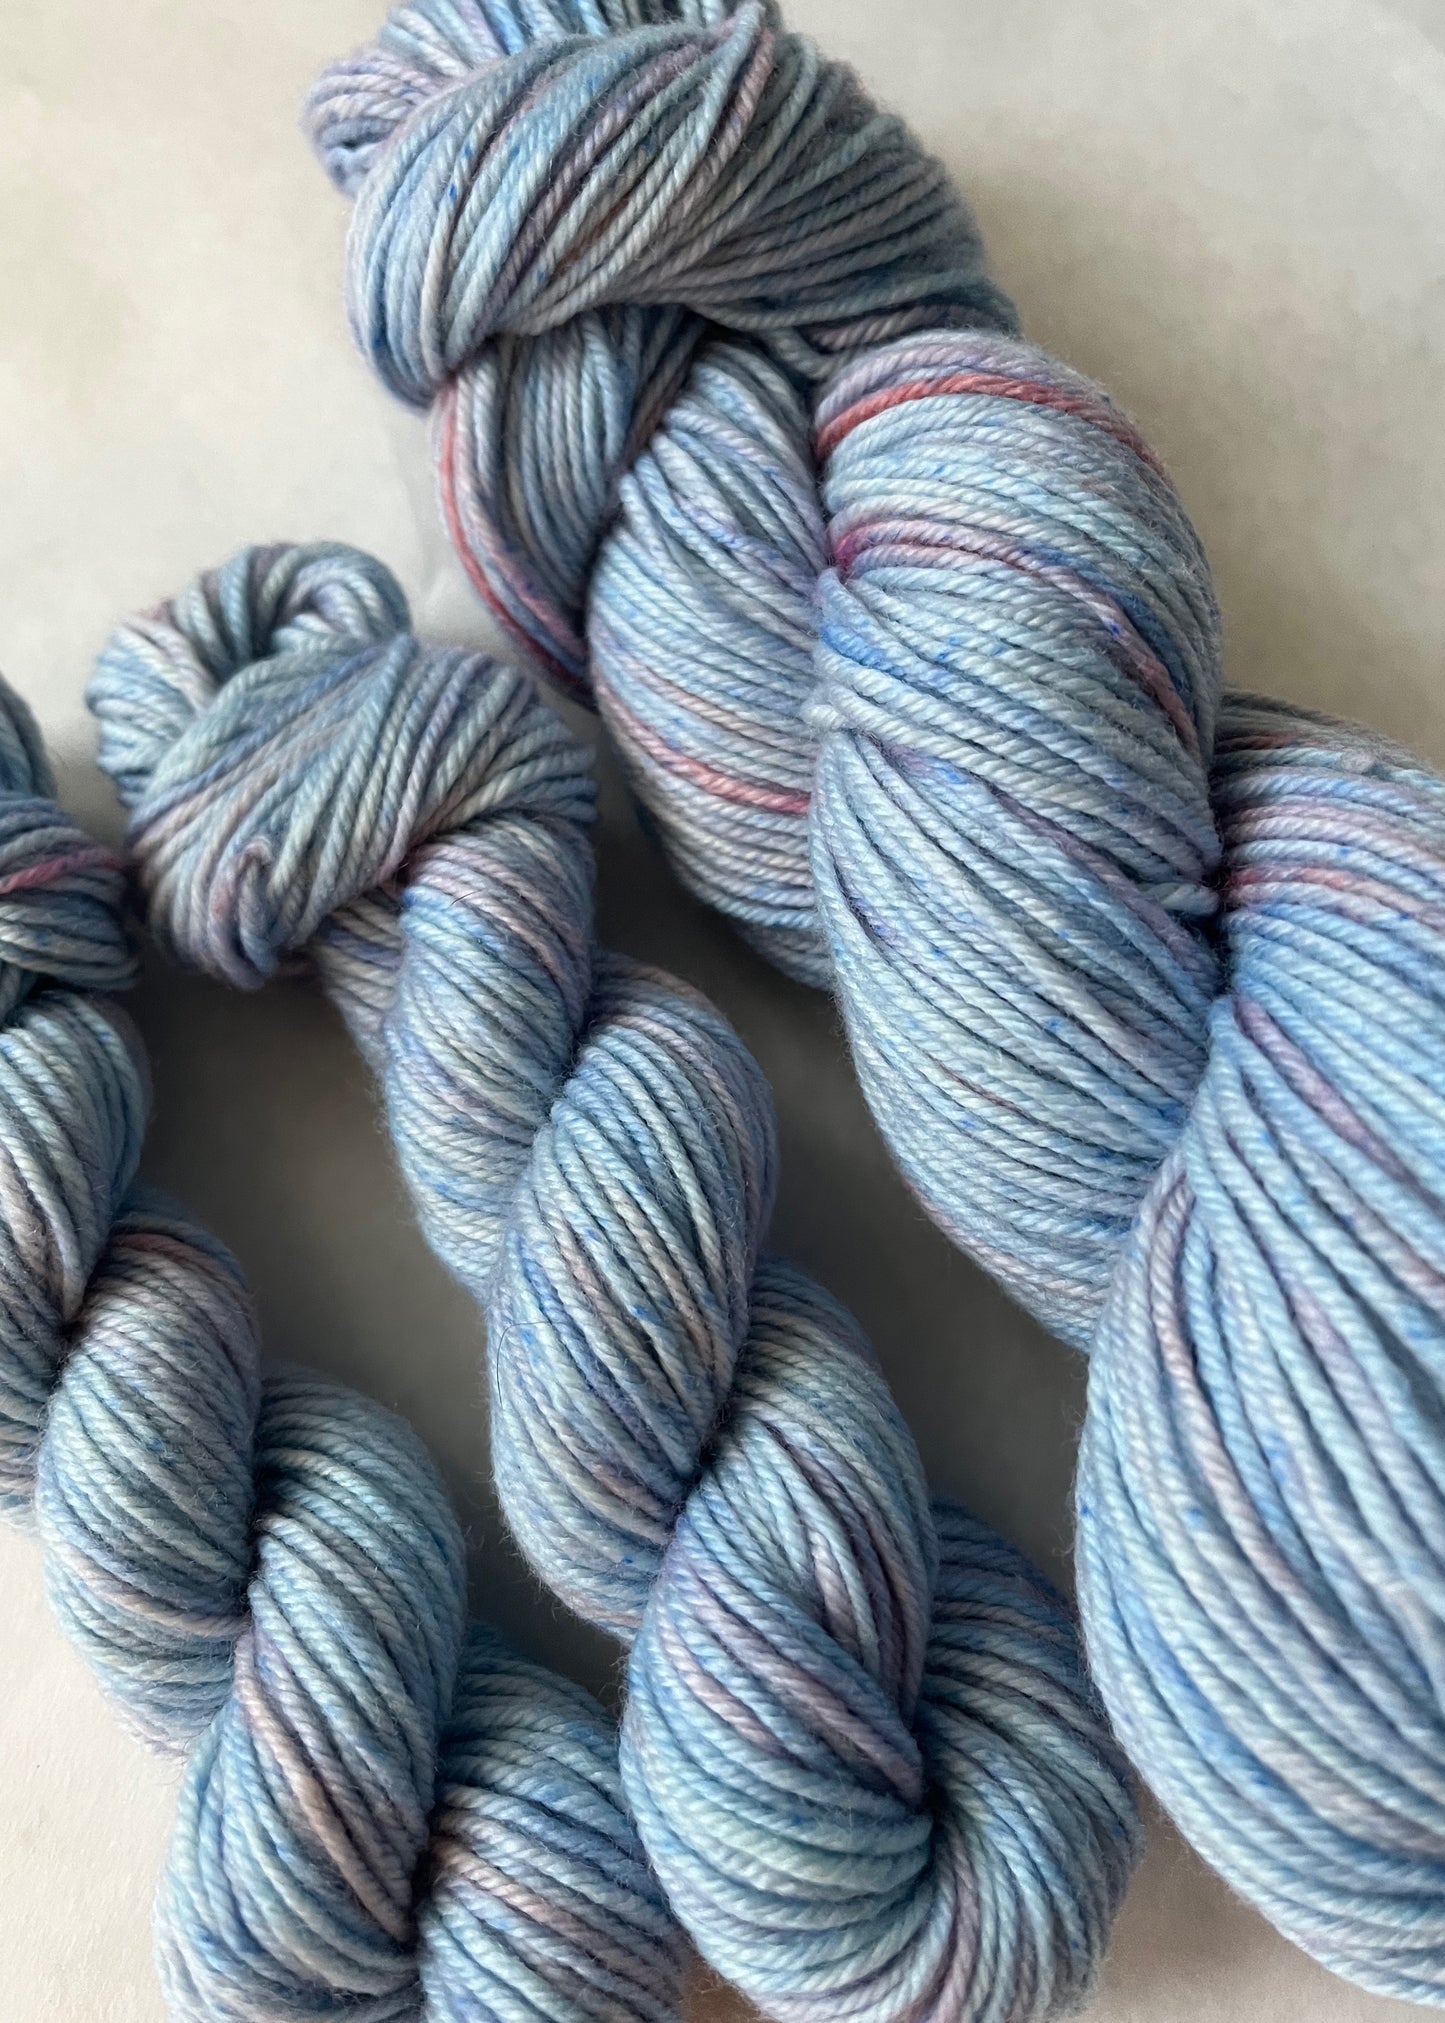 Dyed to order: Winter Sunrise